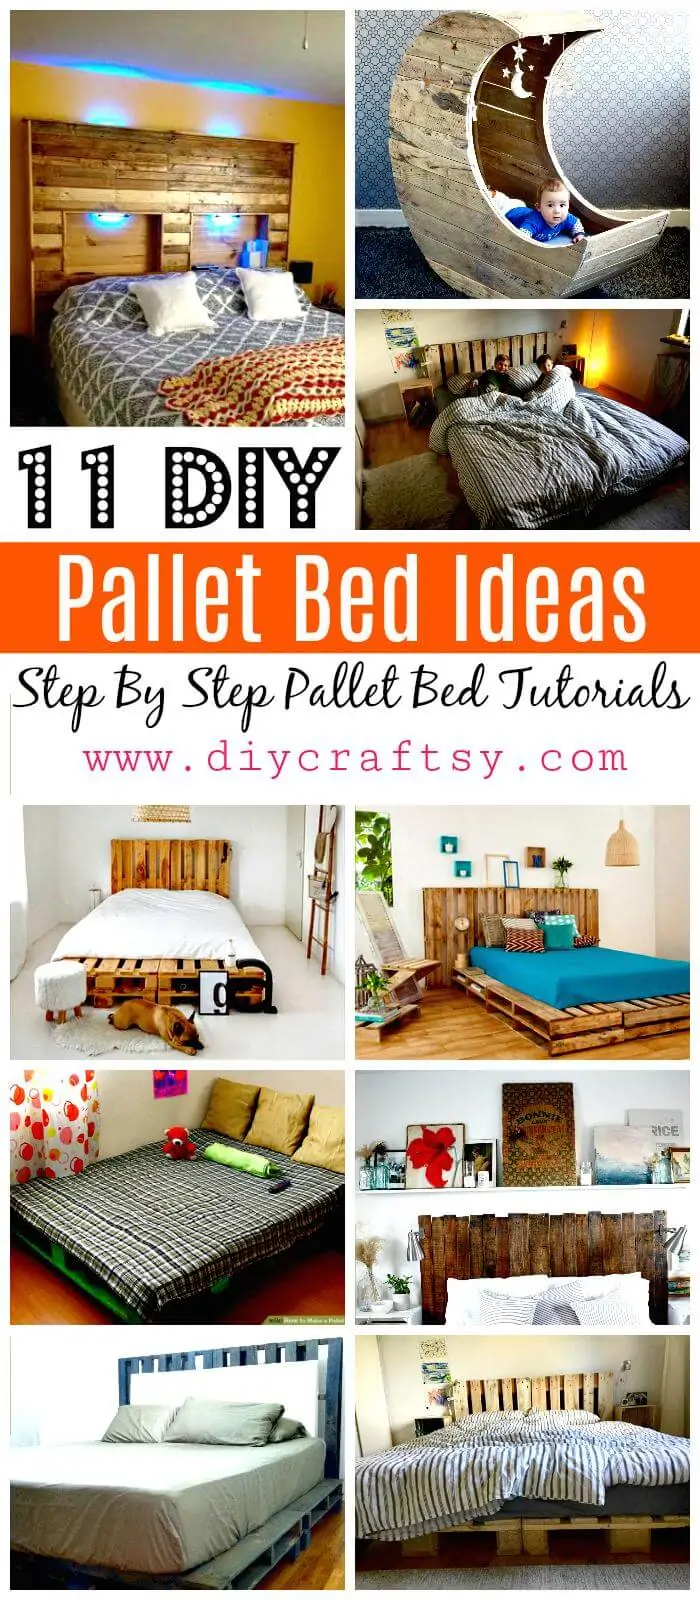 11-Pallet-Bed-Ideas-Step-By-Step-Pallet-Bed-Frame-Tutorials